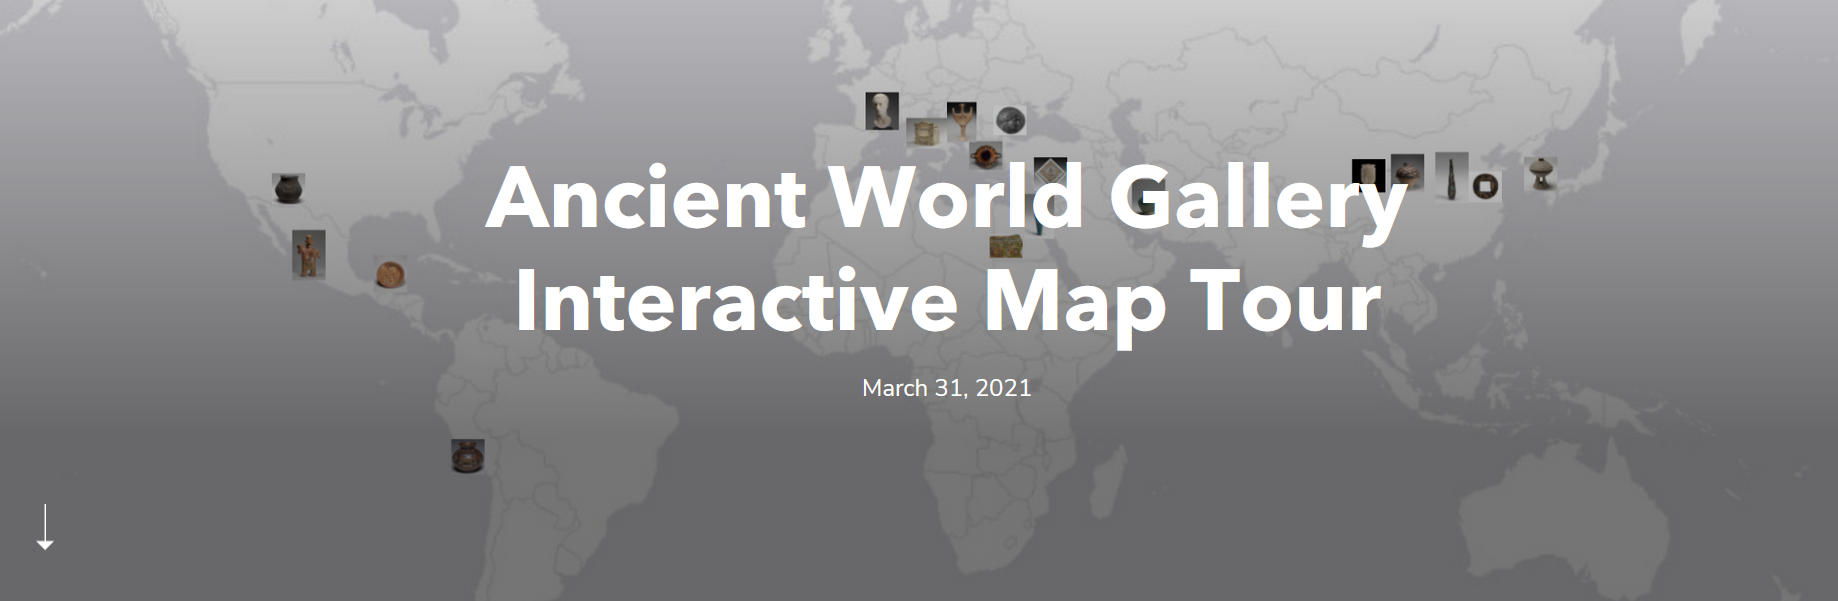 Screenshot of the opening page of ancicnet map that shows a map of the world with the locations of where the artowrks in the map are located